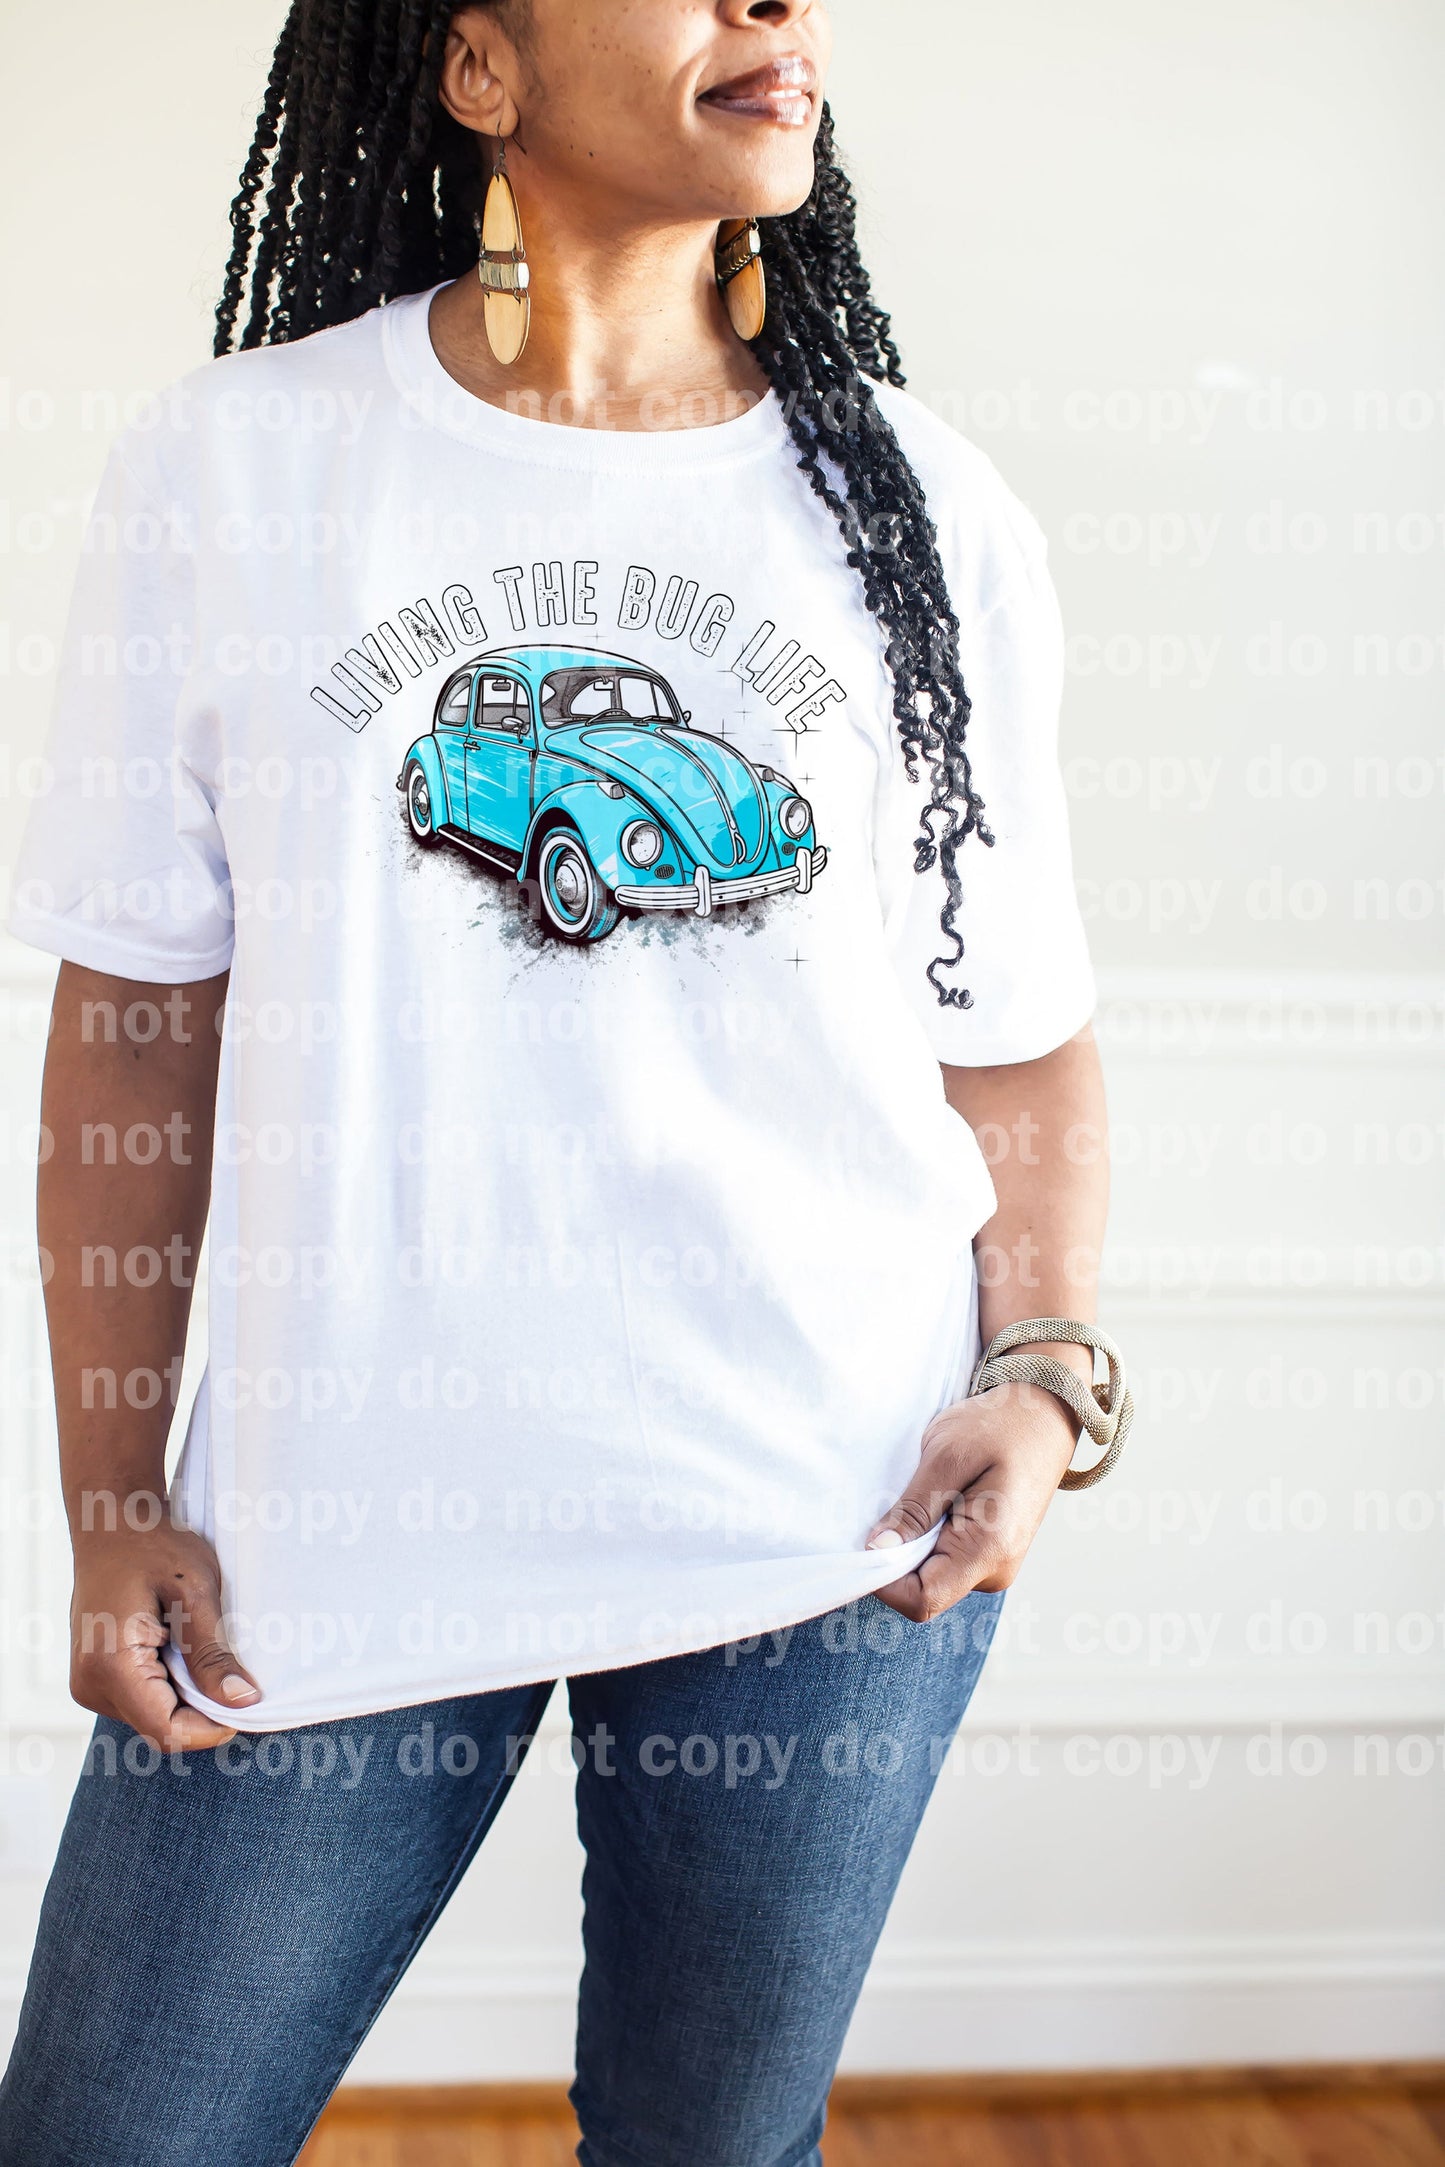 Living The Bug Life Dream Print or Sublimation Print